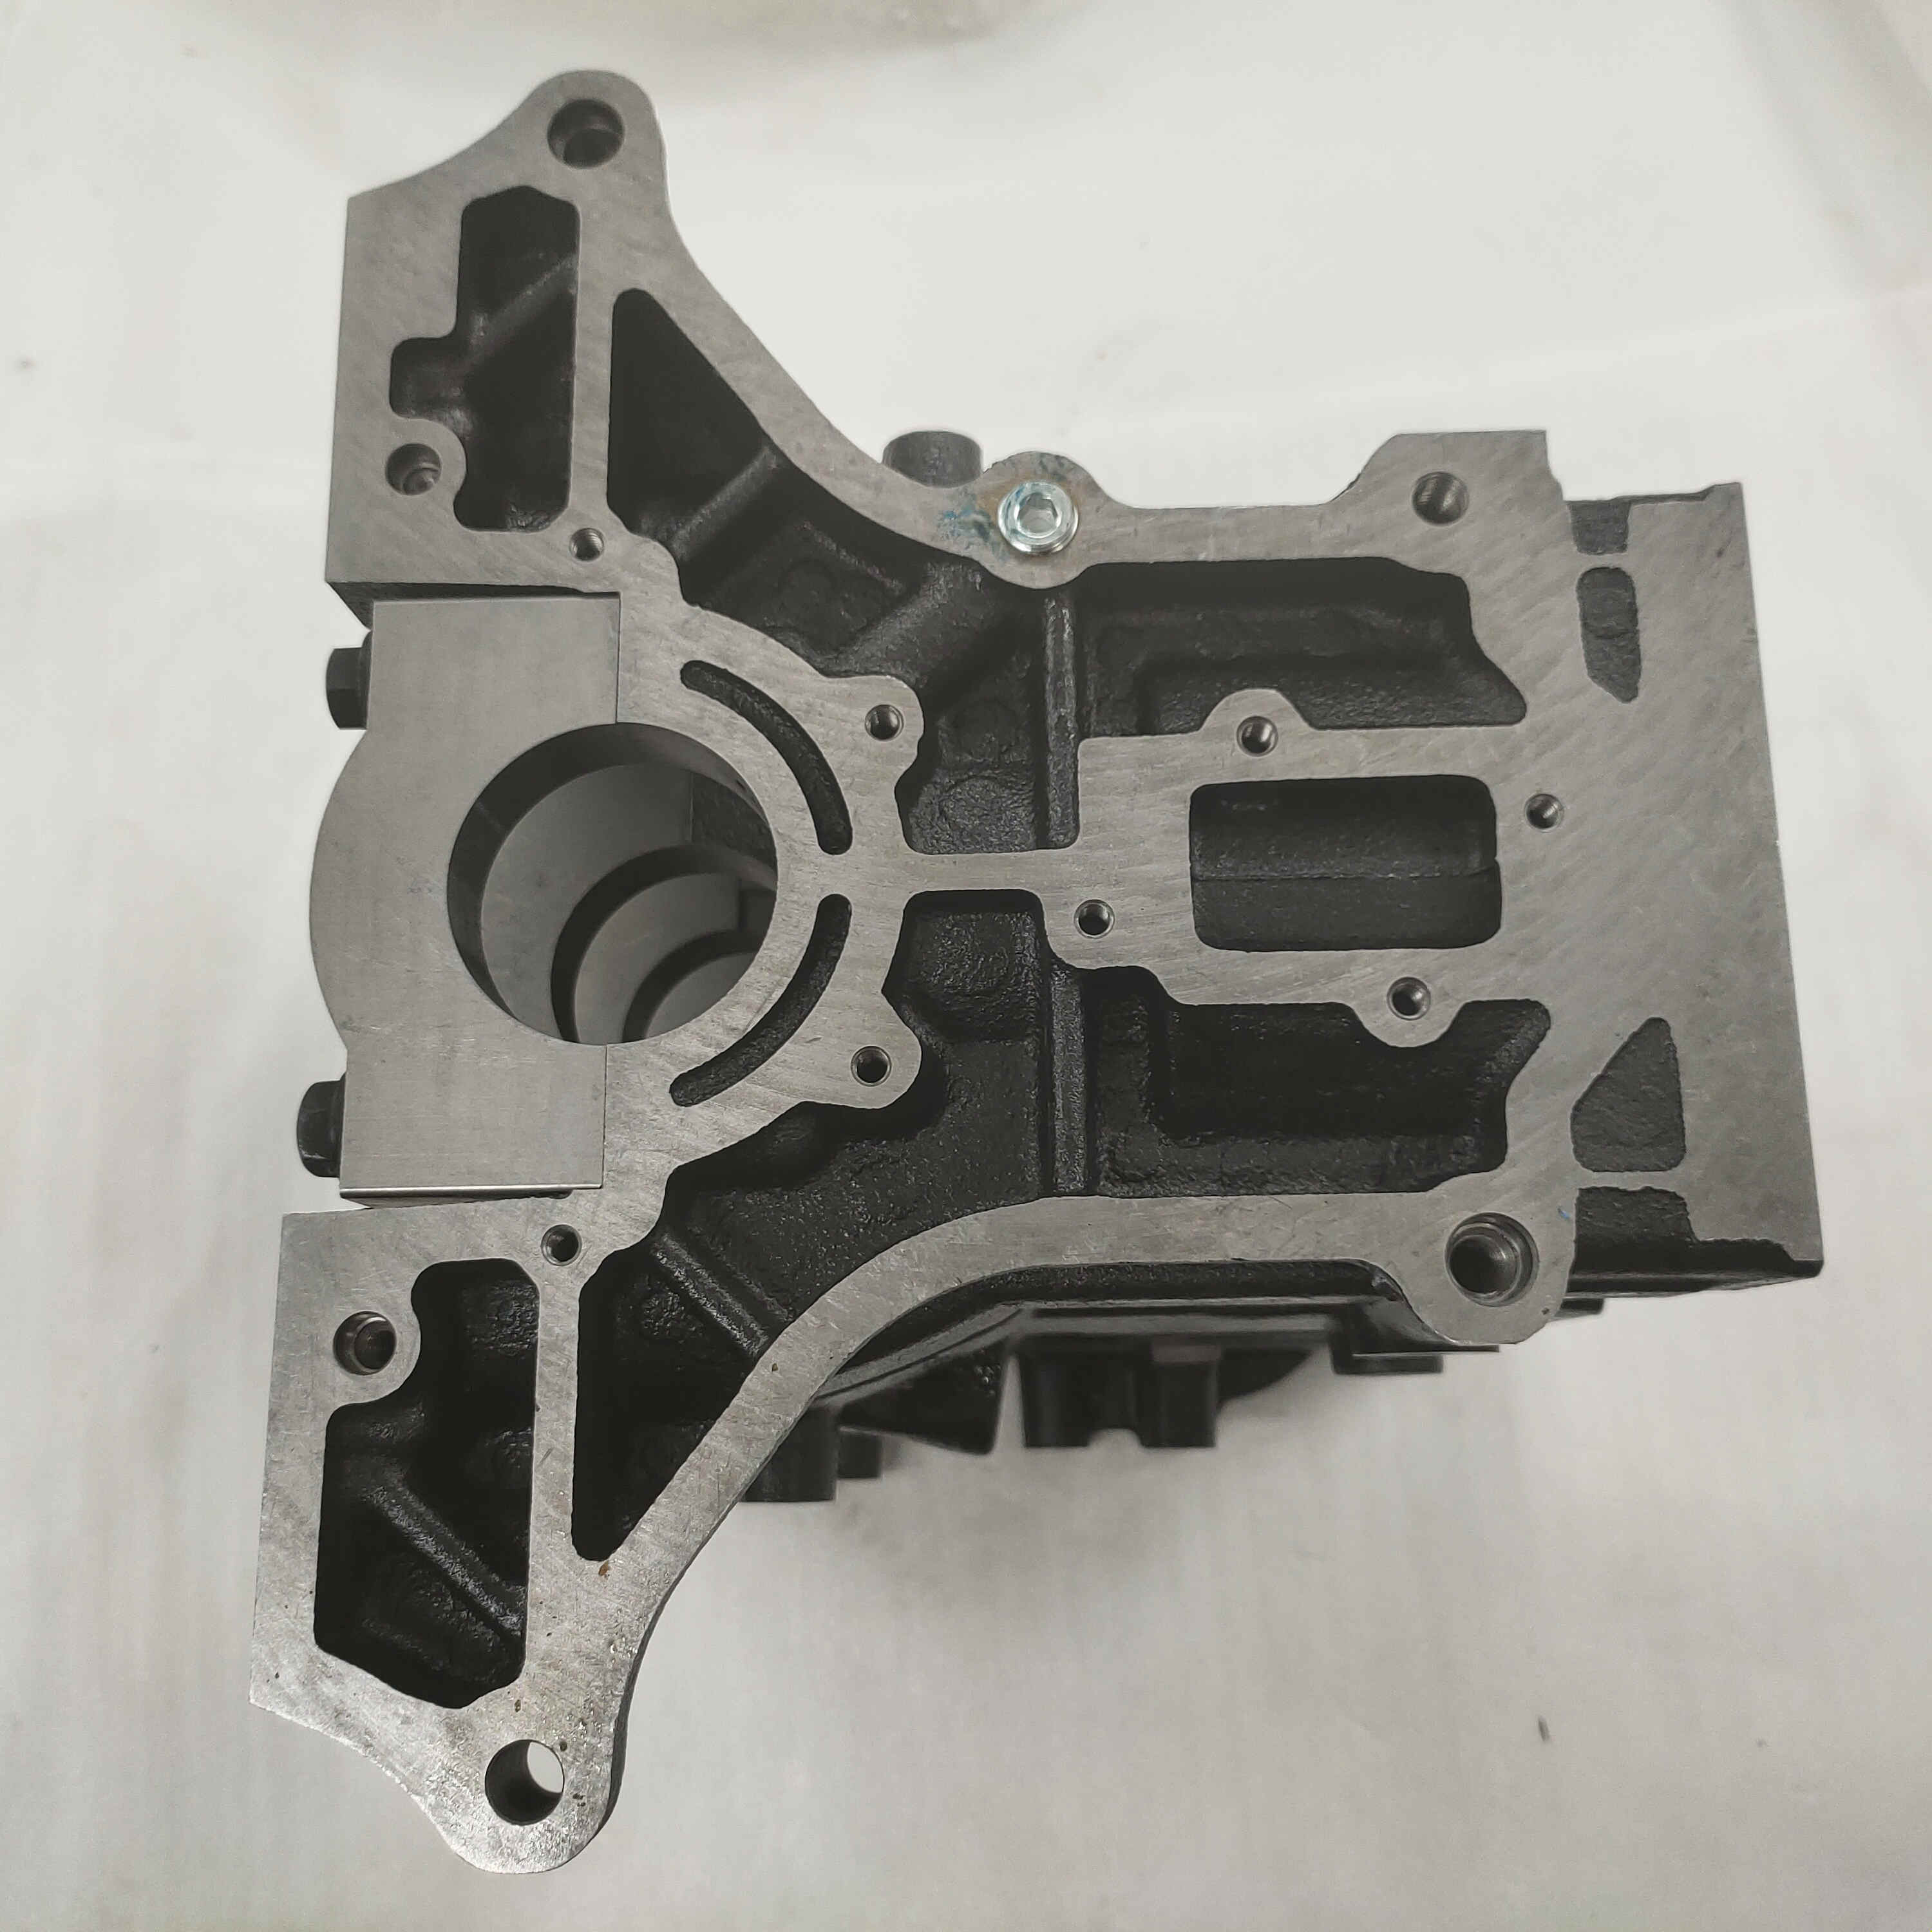 DAYANG Tricycle 800cc water-cooled engine spare parts casting Cylinder Block custom origin motst permanent product for global